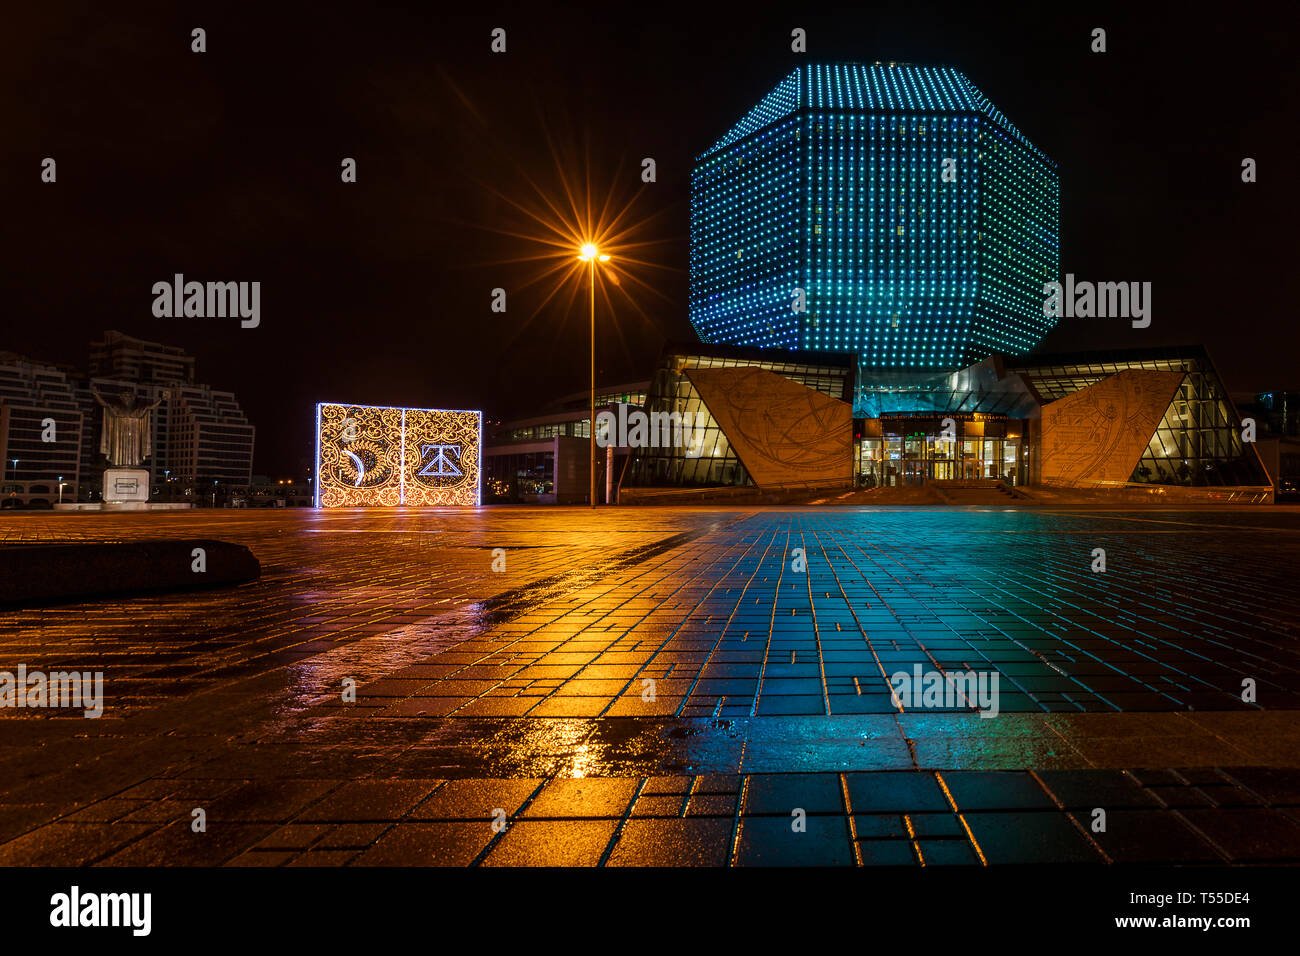 The National Library of Belarus in Minsk at night Stock Photo